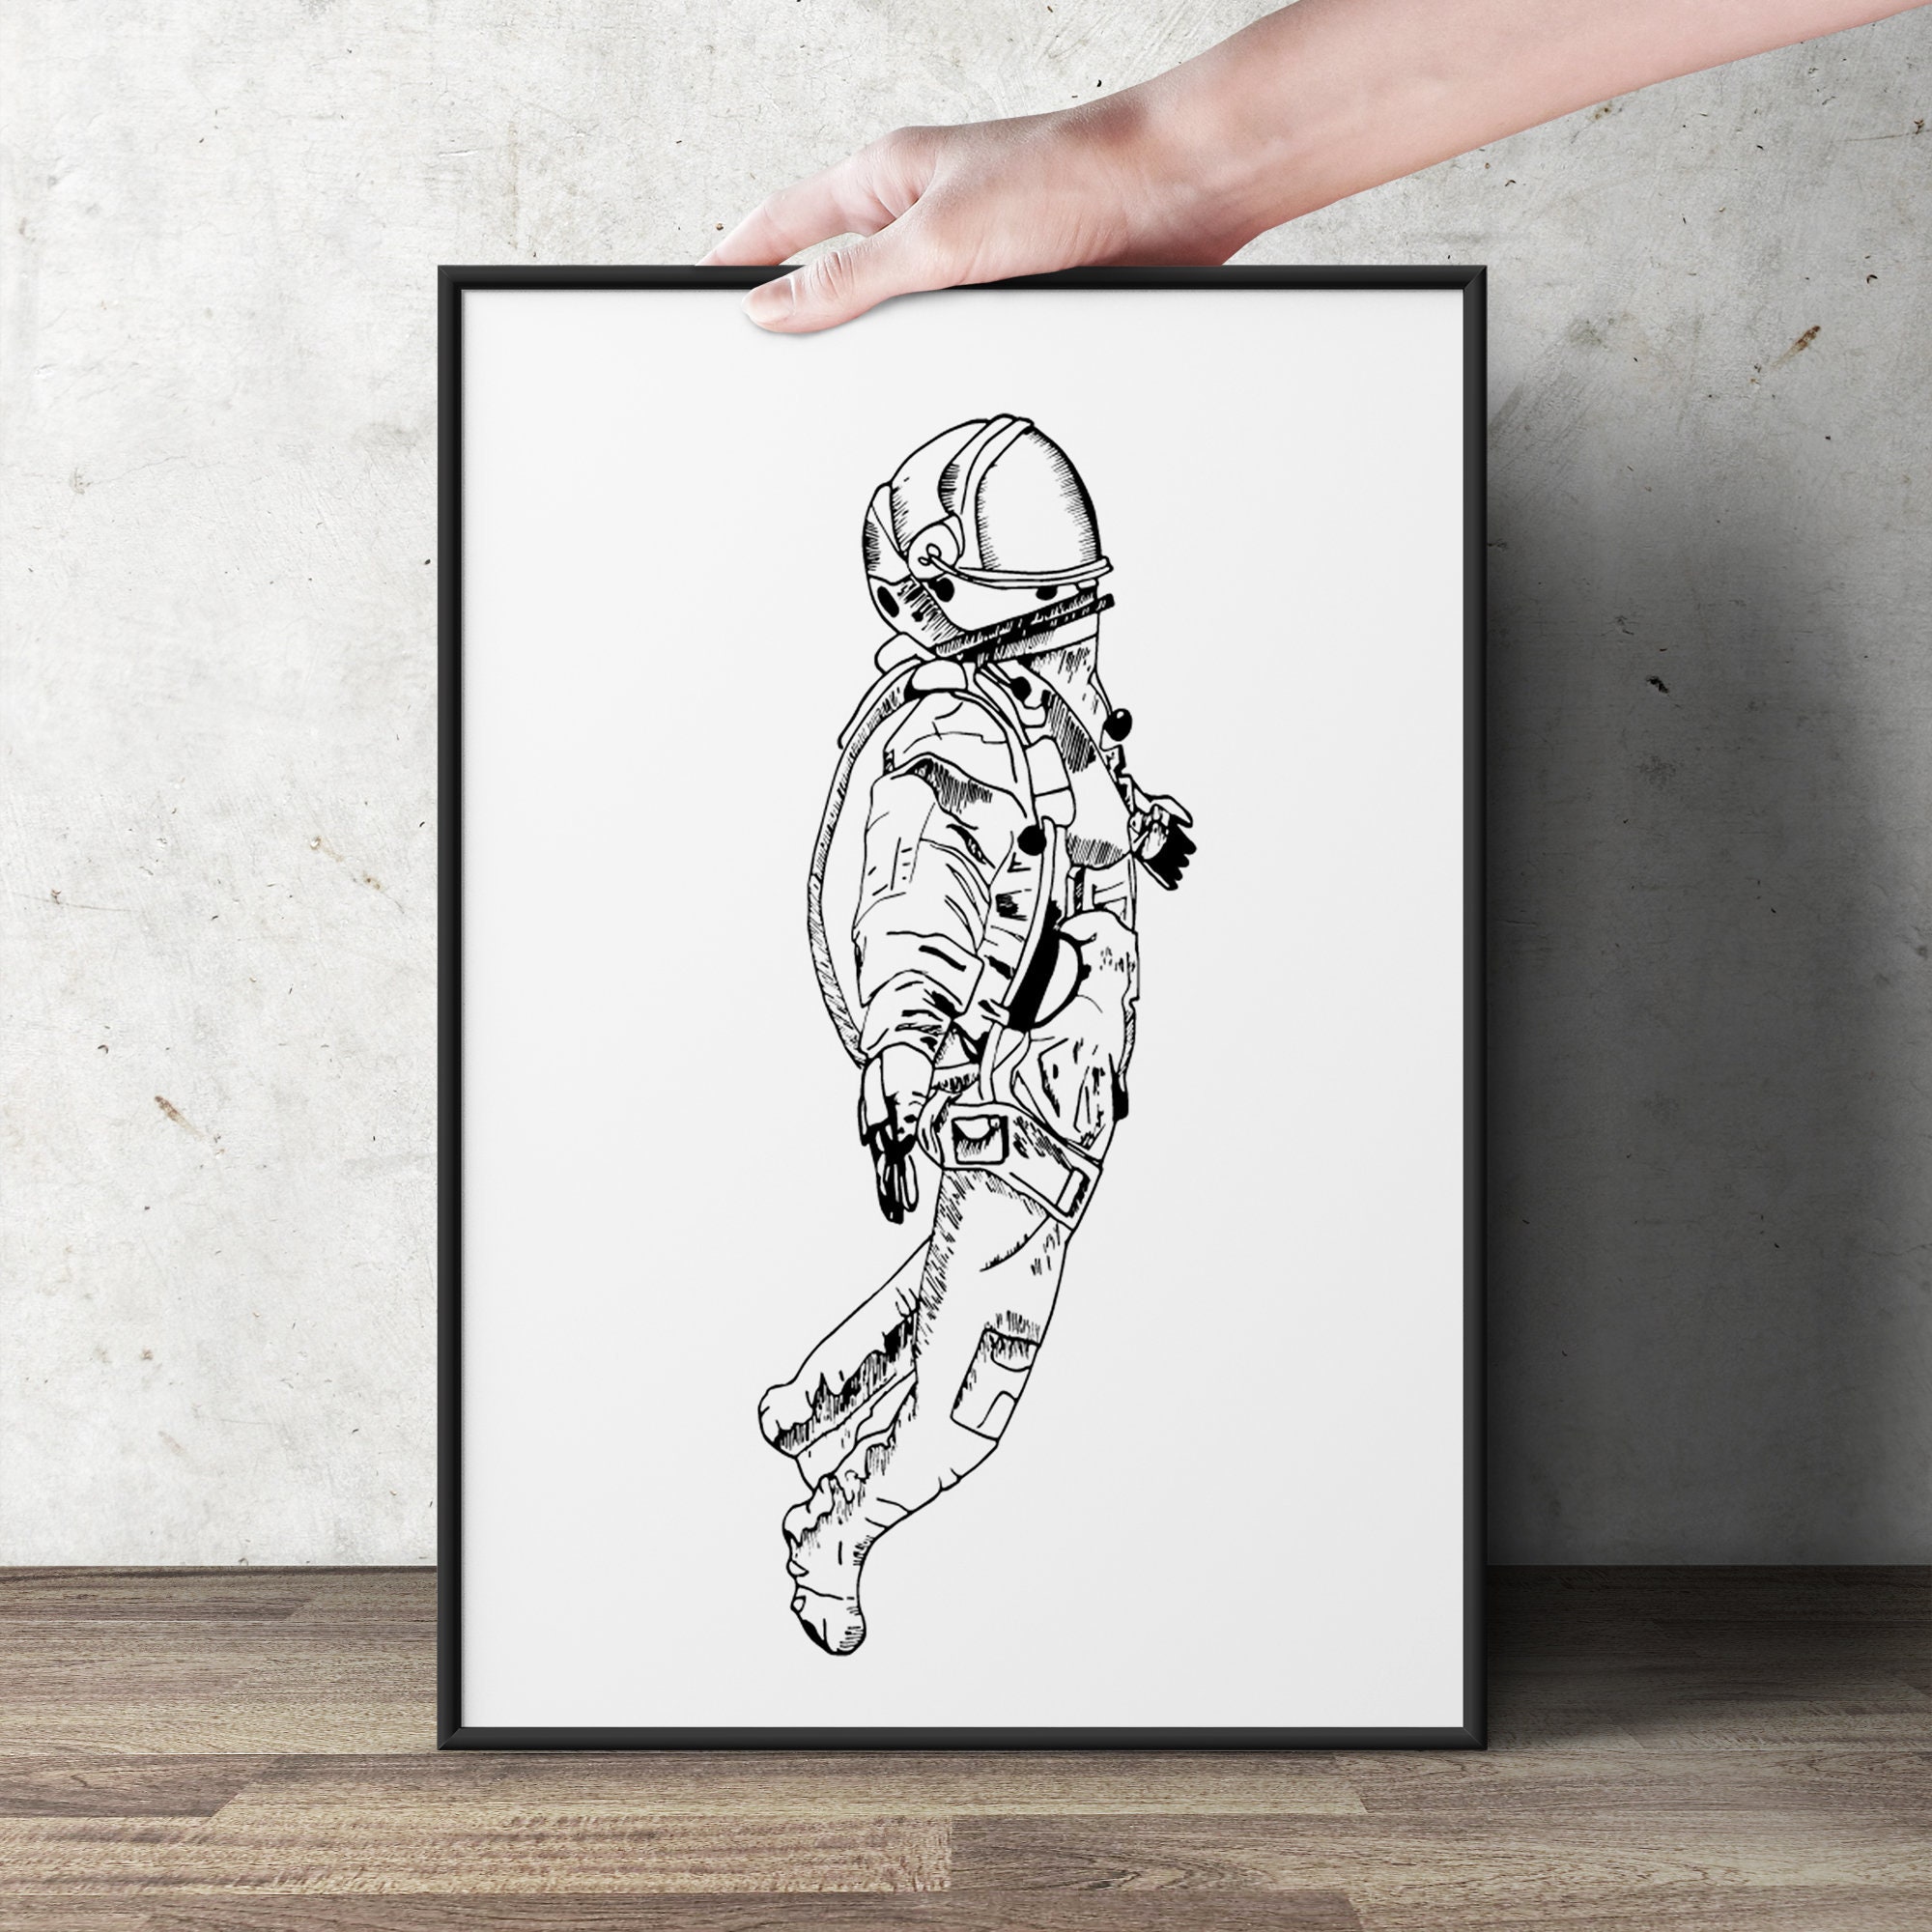 How to Draw an Astronaut | Astronaut drawing, Space drawings, Easy drawings